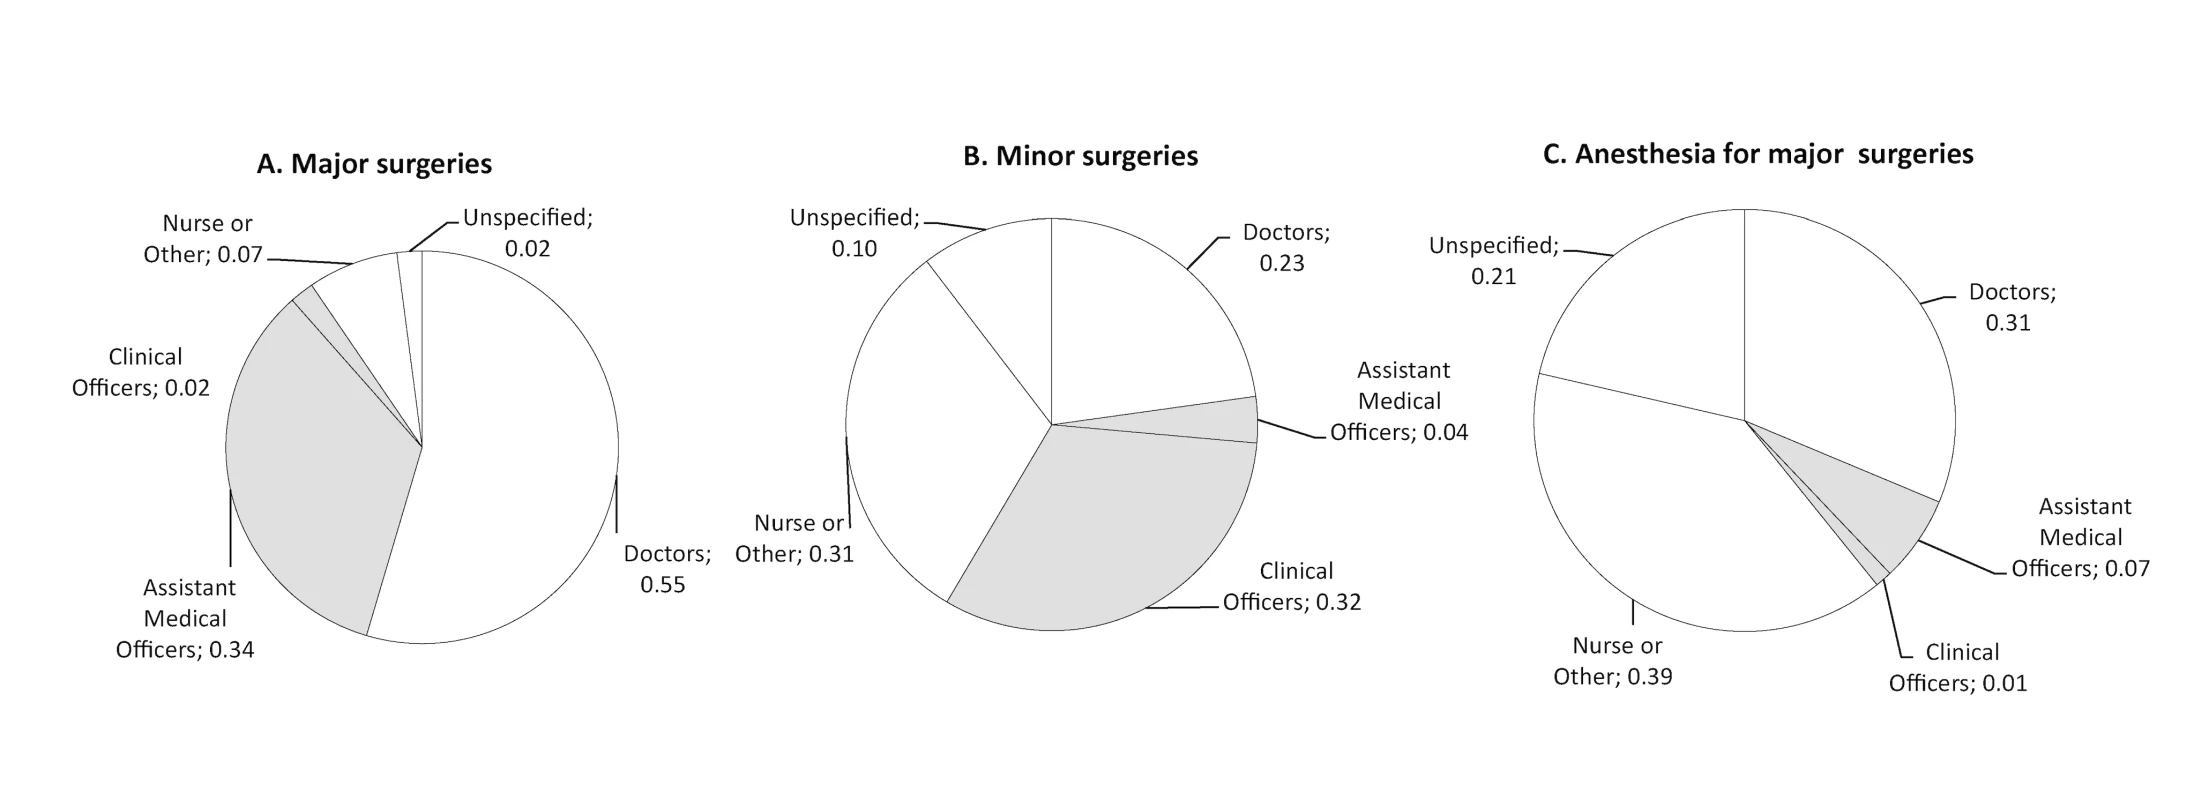 Providers of major surgery, minor surgery, and anesthesia across eight hospitals in three Sub-Saharan African countries.